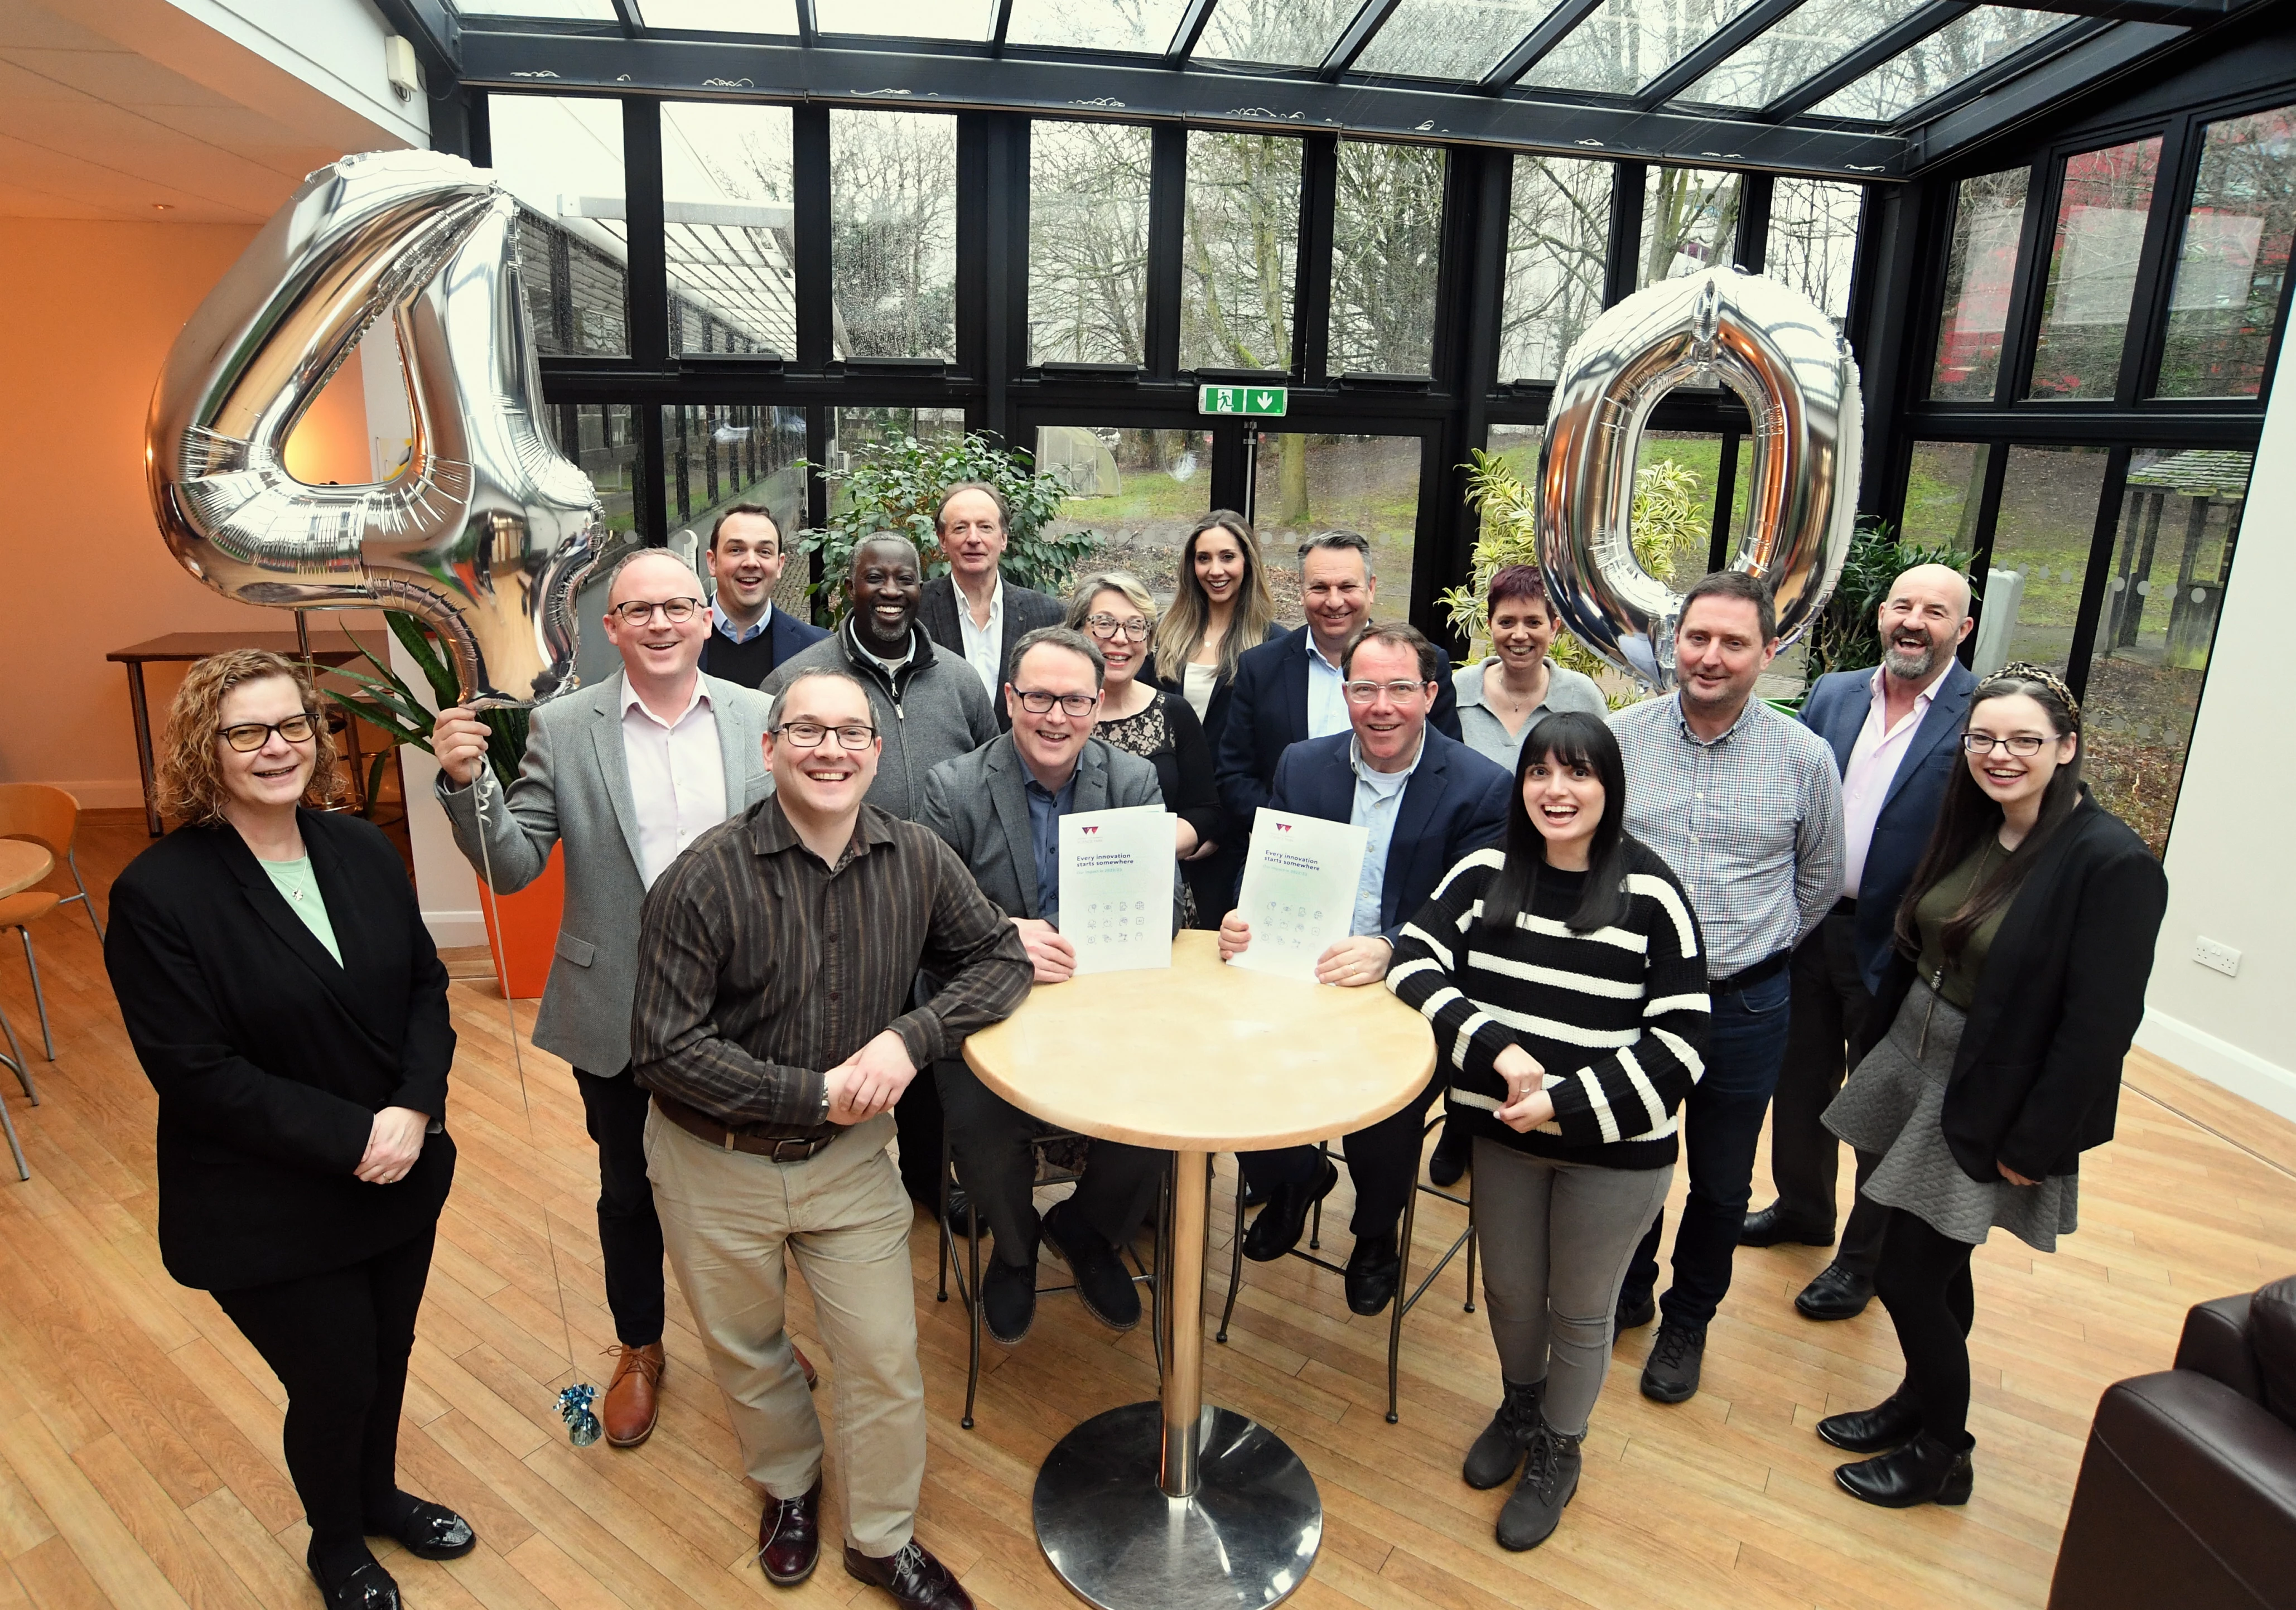 The University of Warwick Science Park team and partners celebrate the release of its 2022/23 impact report and its 40th anniversary this year.